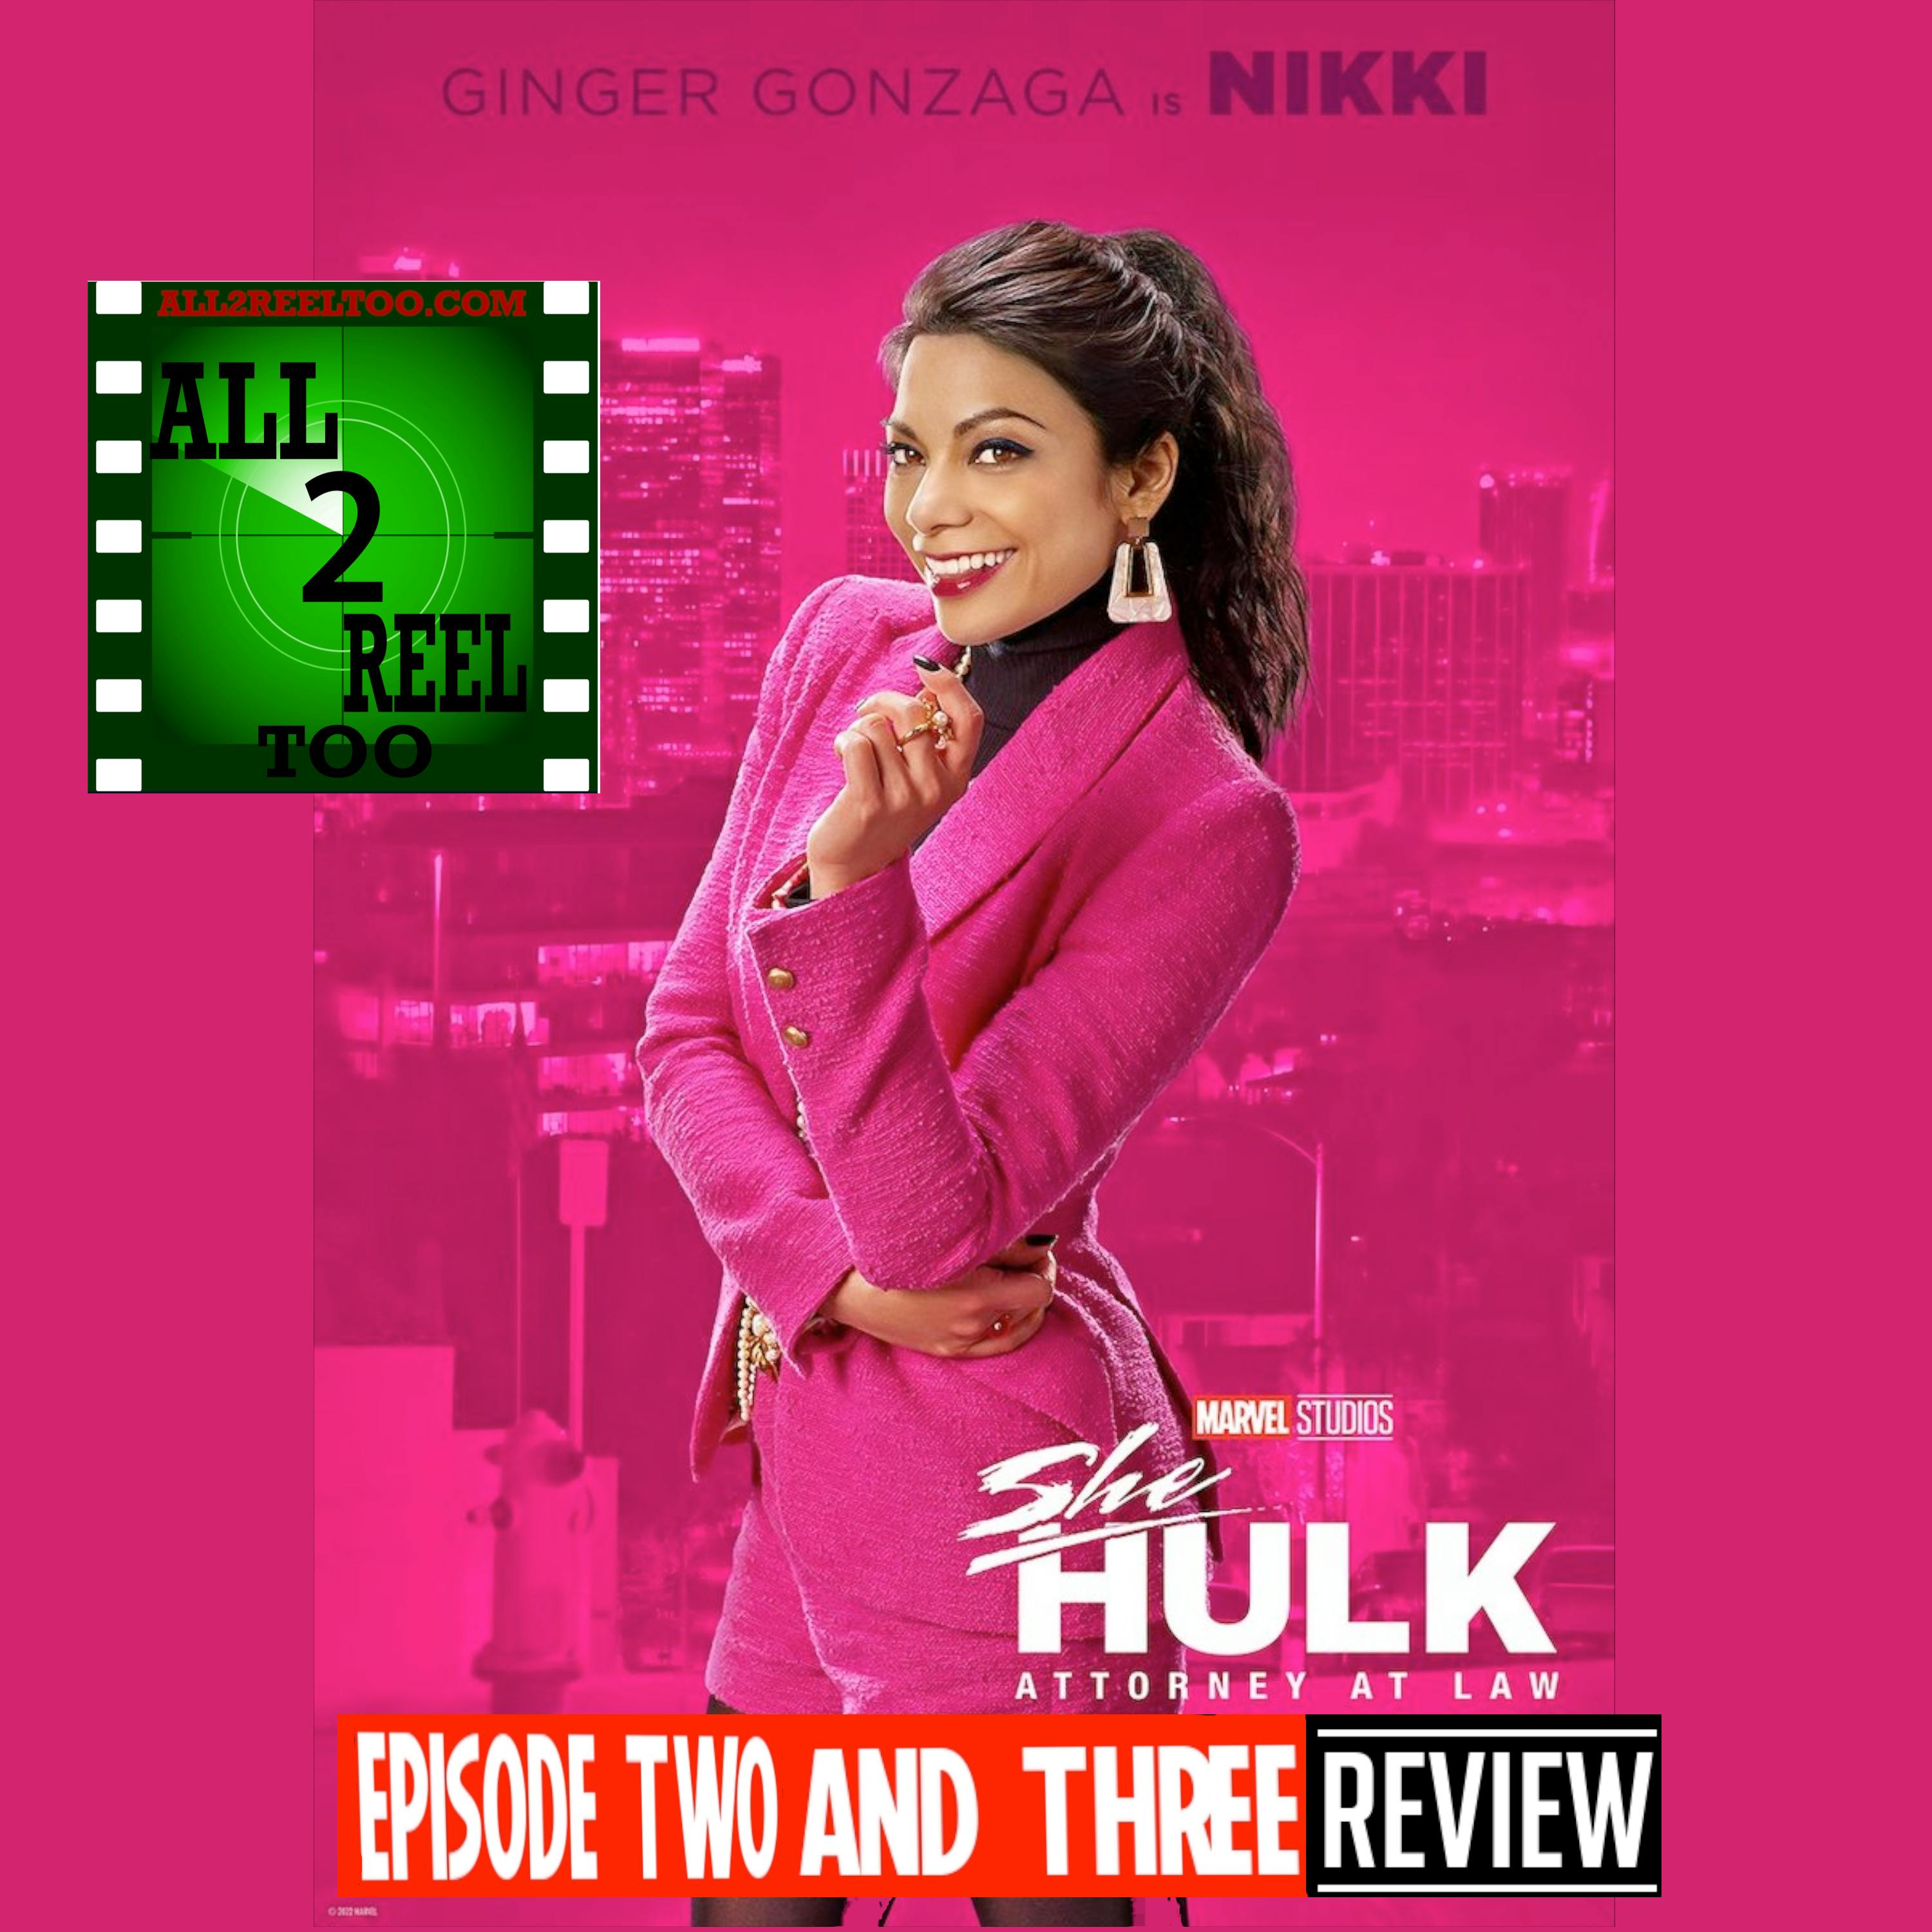 She-Hulk: Attorney at Law - EPISODE 2 and 3 REVIEW Image